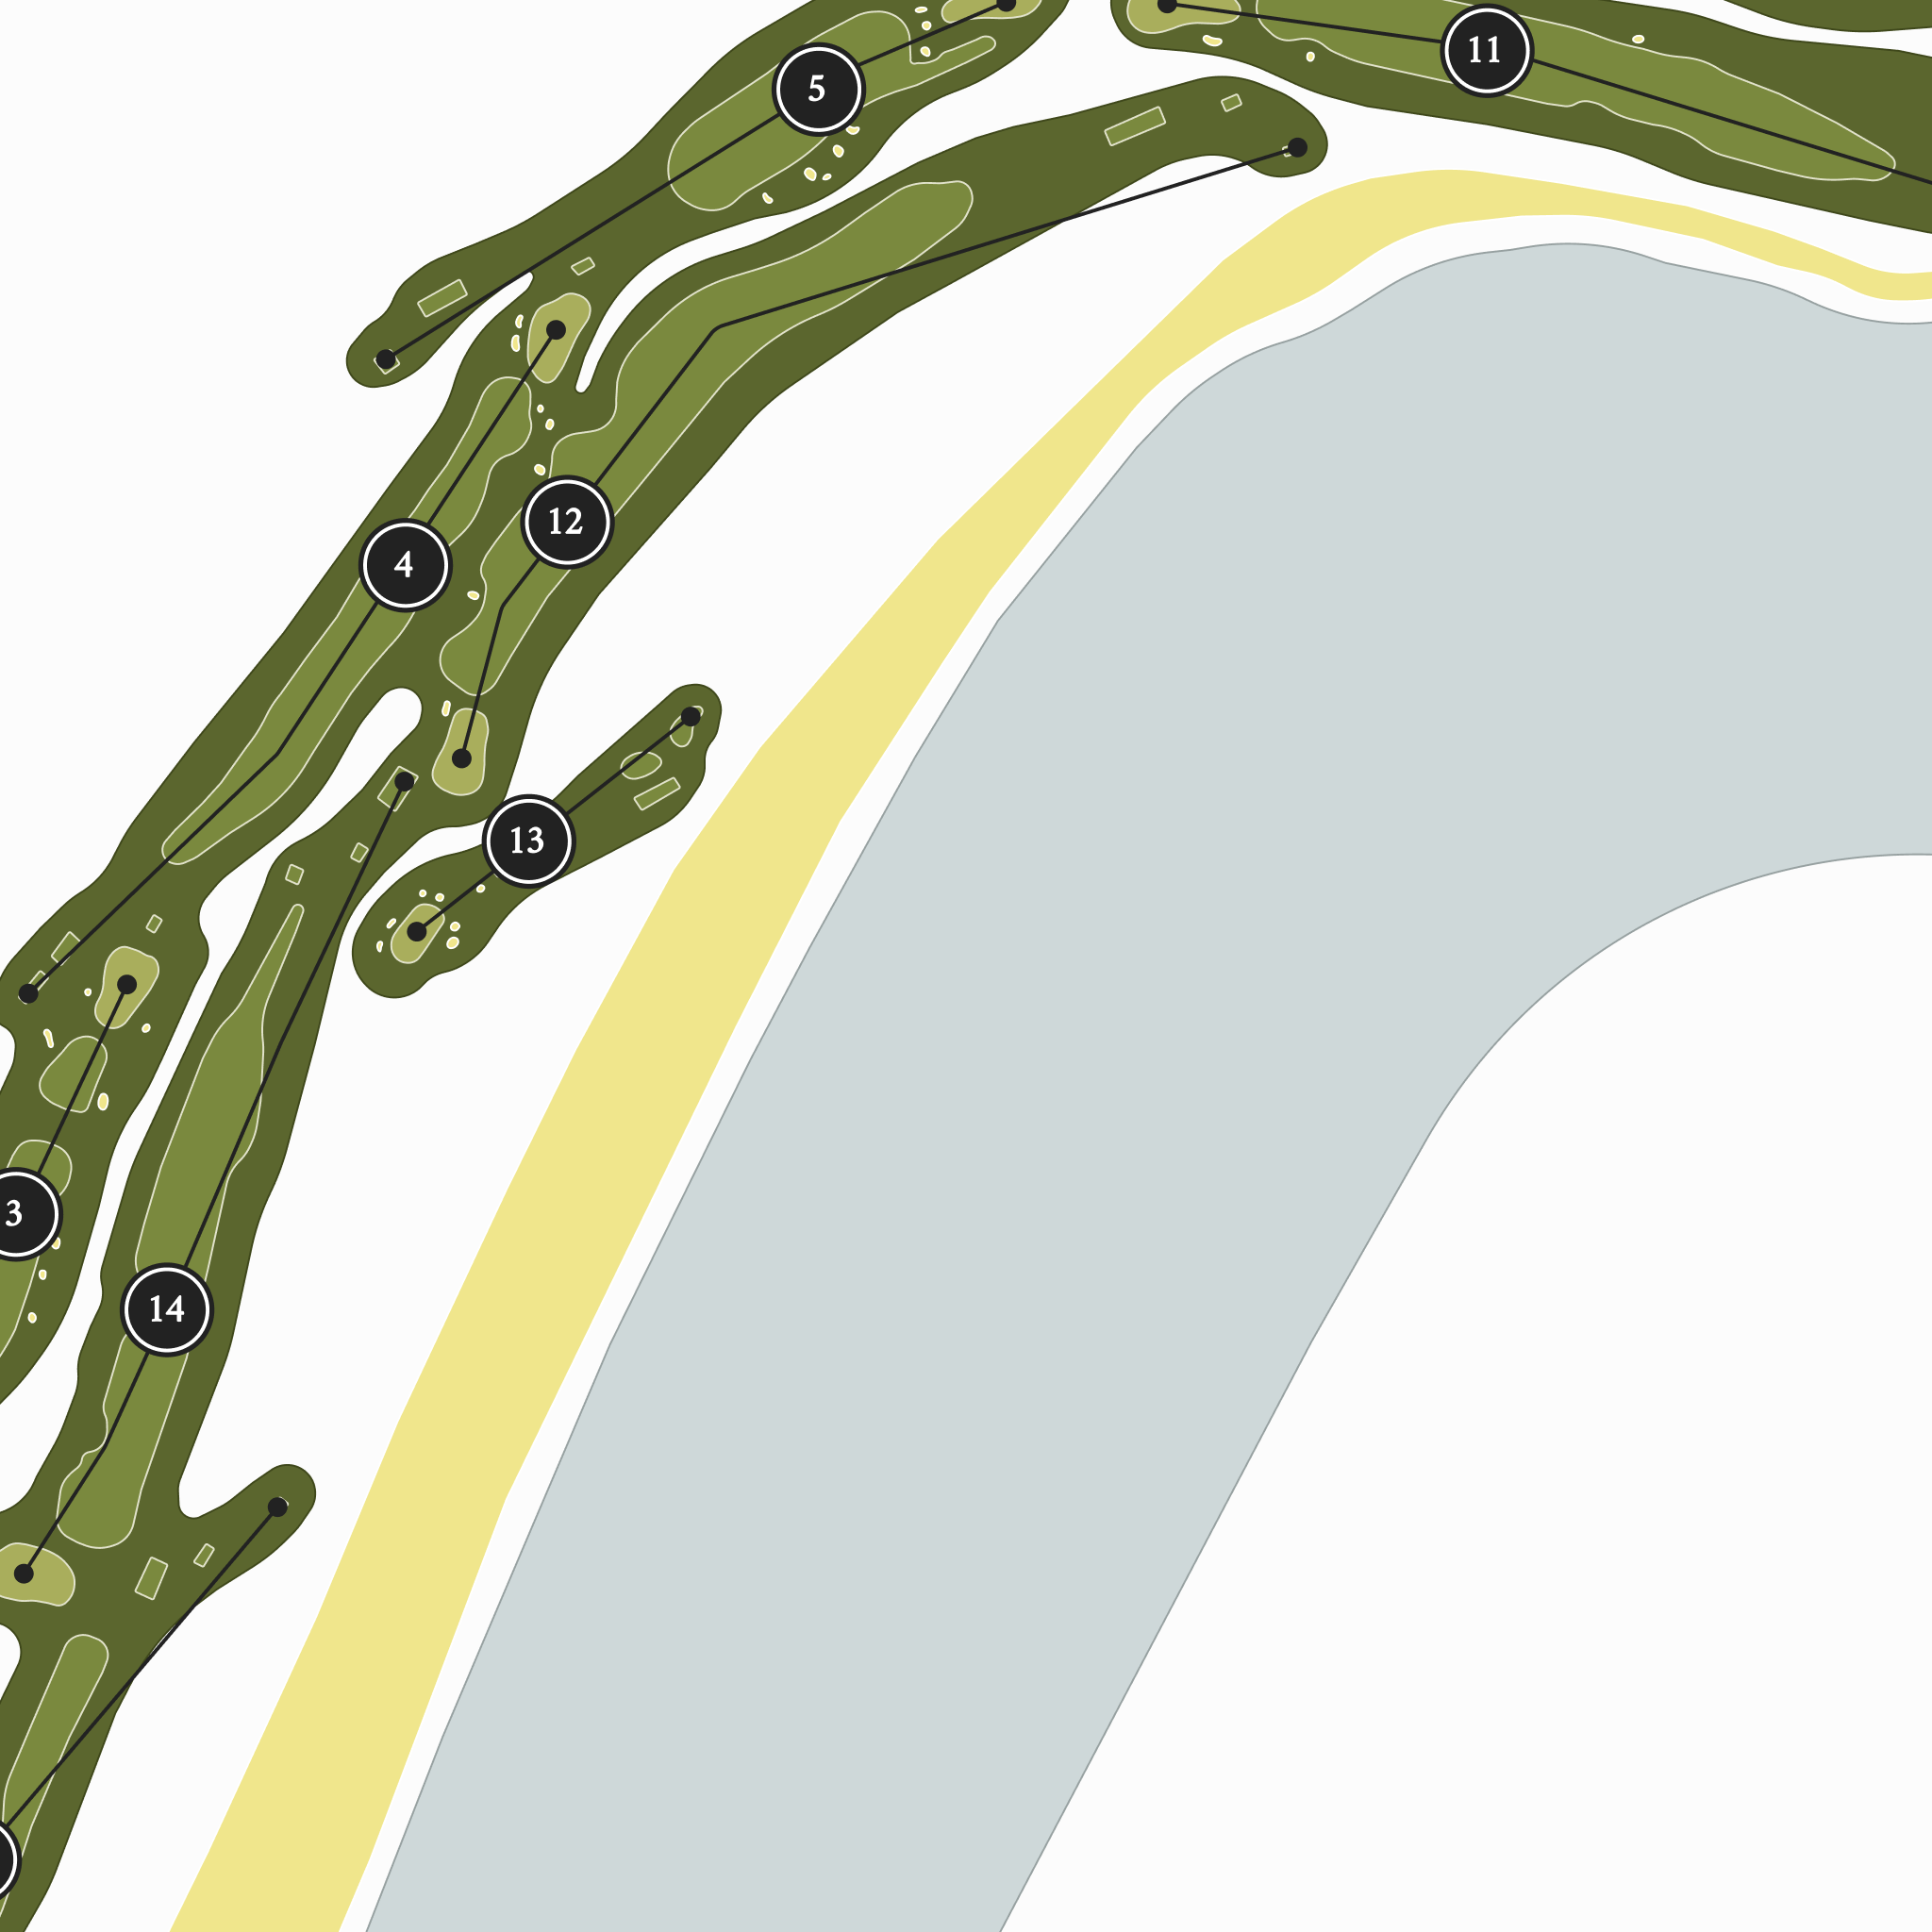 Royal Dornoch Golf Club - Championship Course | Golf Course Map | Close Up With Hole Numbers #hole numbers_yes